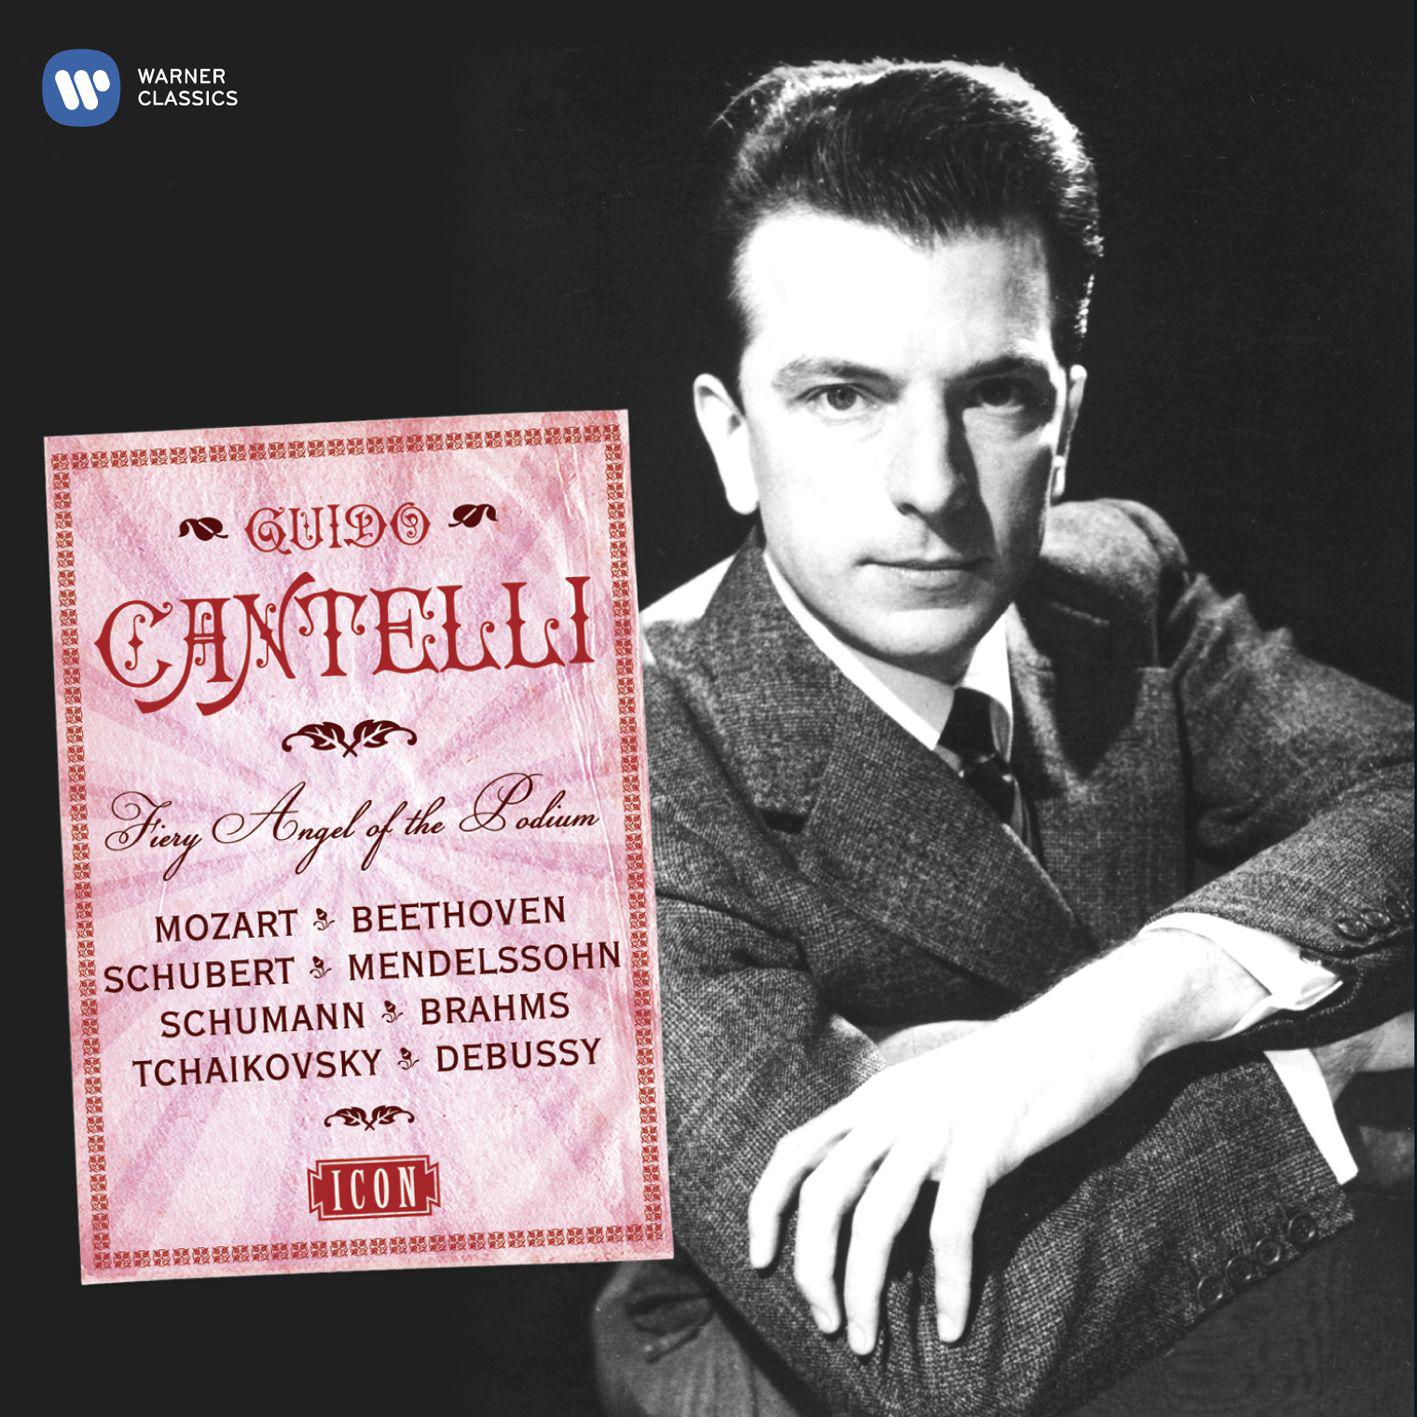 Remembering Guido Cantelli:Cantelli's final recording and death - Beethoven Symphony No. 5: Finale